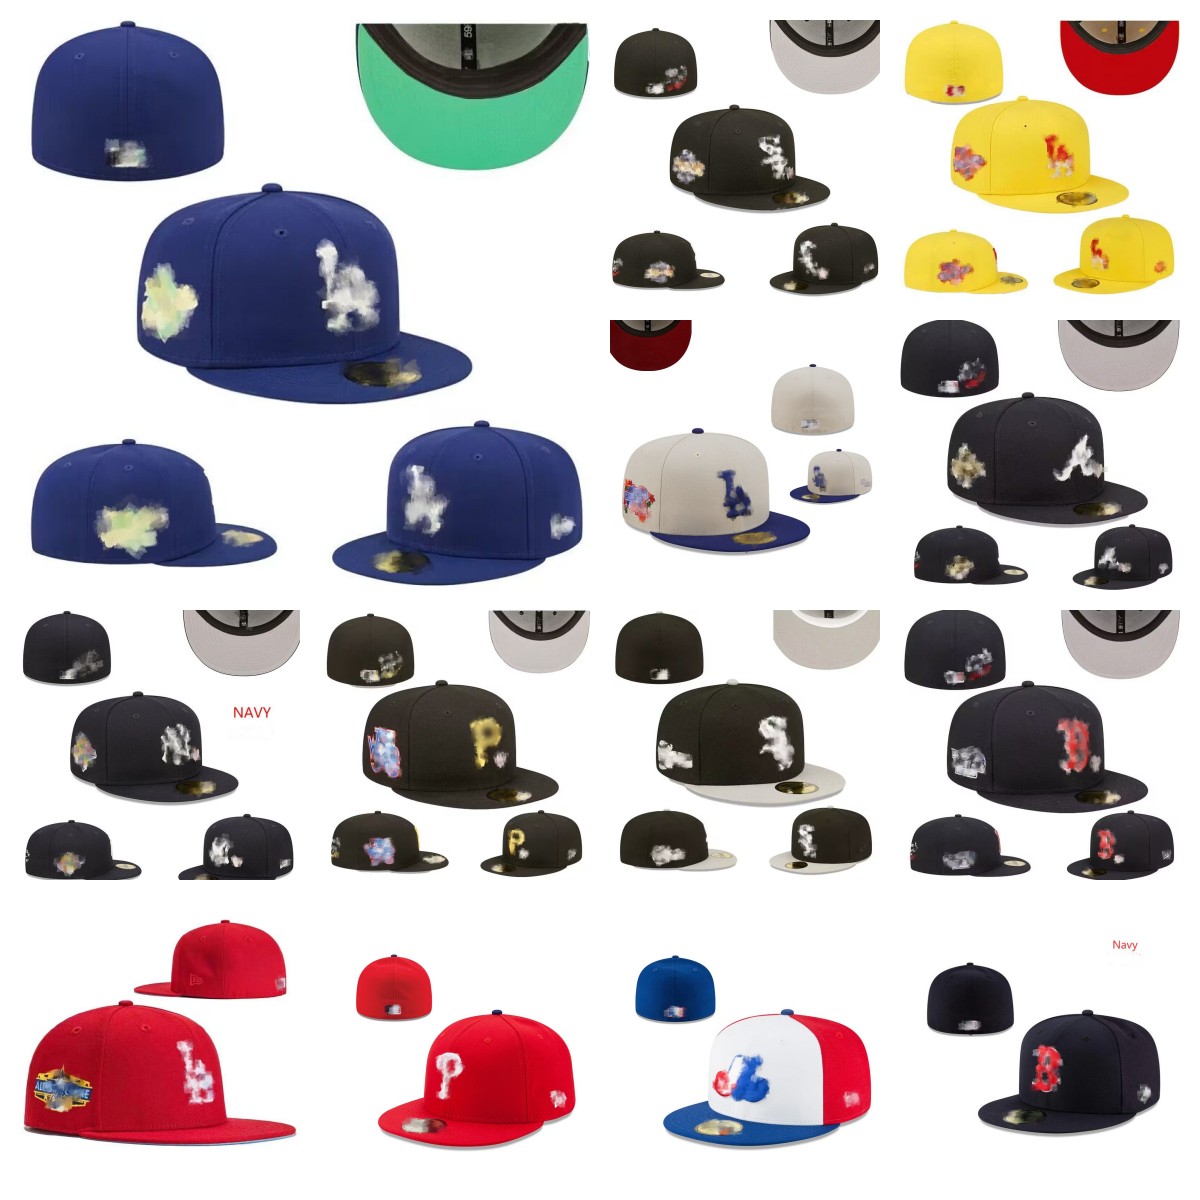 

Wholesale Fitted hats Snapbacks Adjustable baskball Caps All Team Logo Outdoor Sports chrome heart Embroidery casquette Closed Beanies alo yoga hat flex cap size 7-8